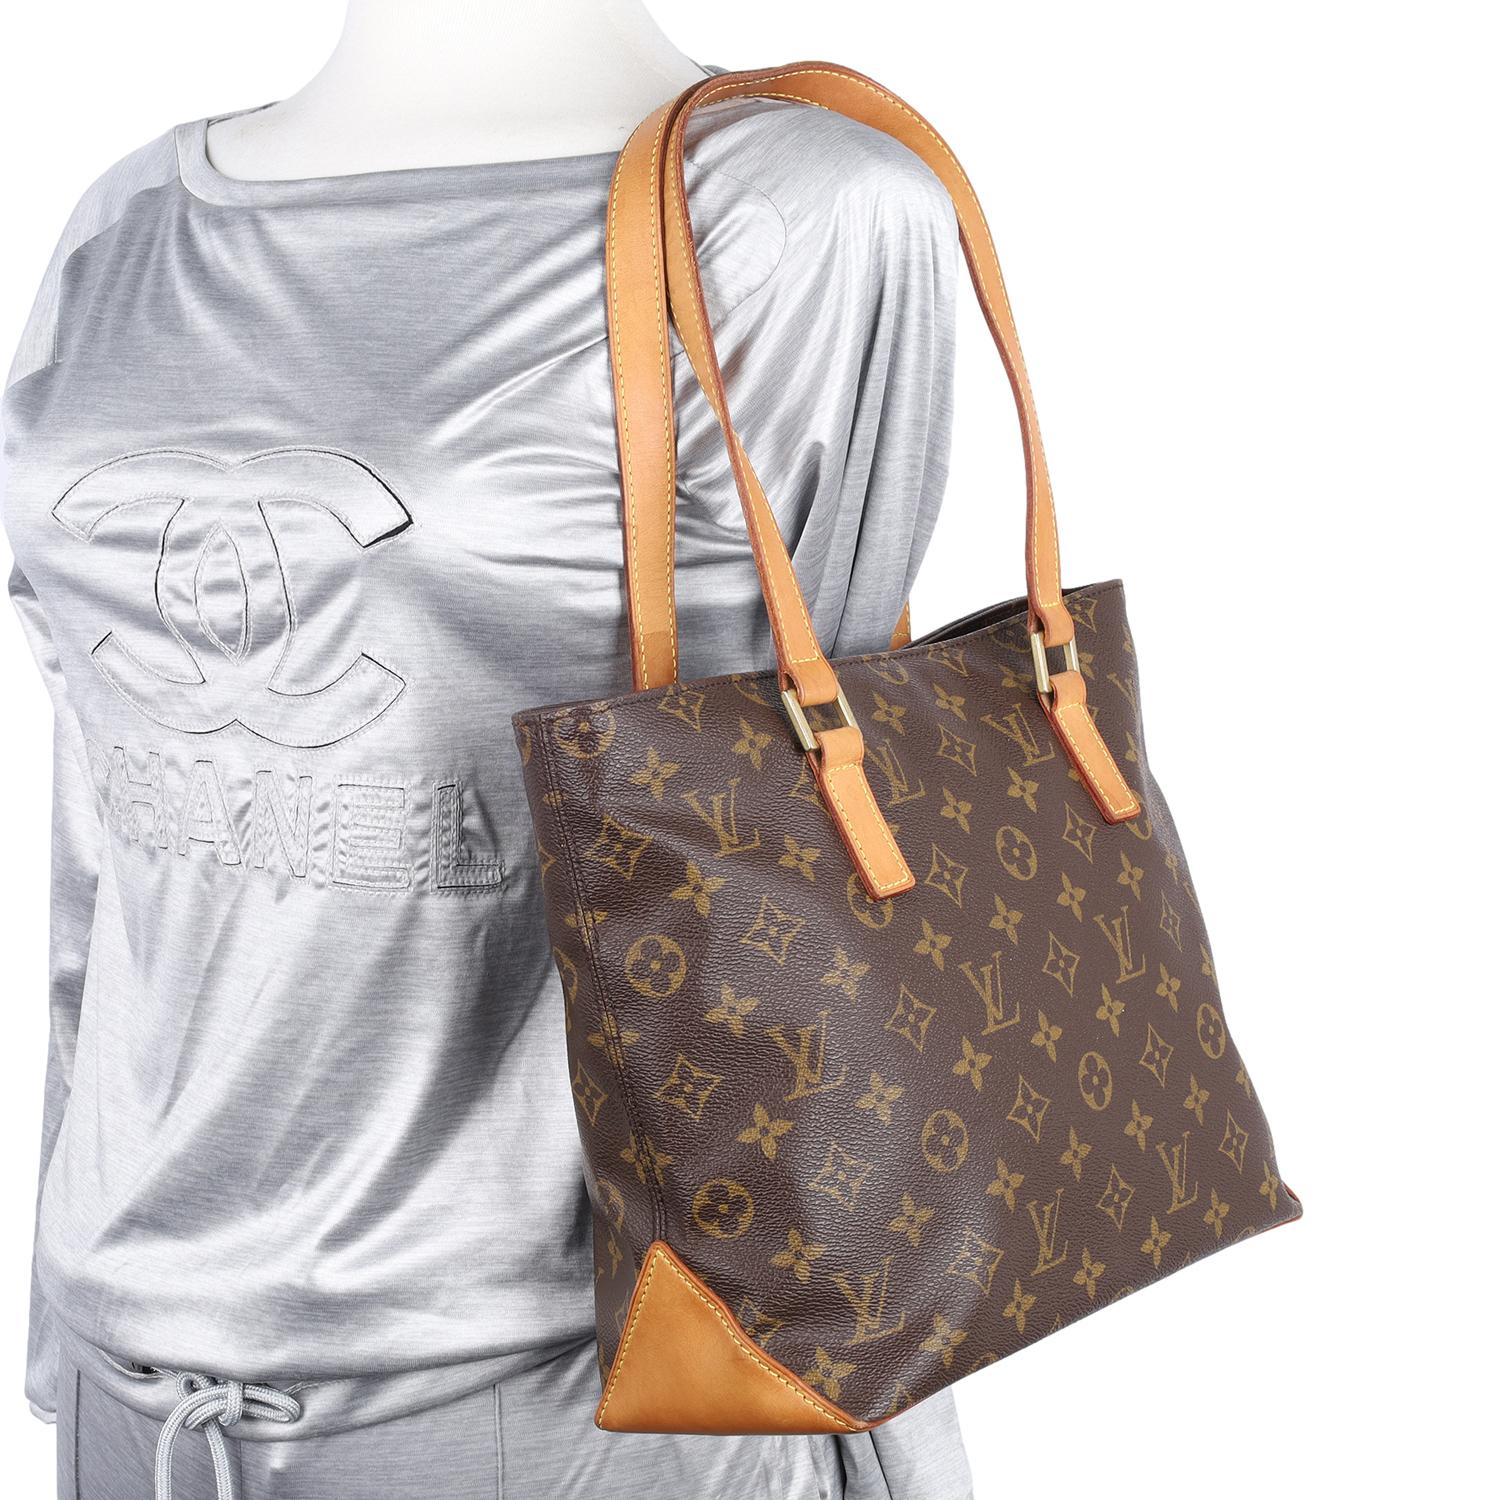 Authentic, pre-loved Louis Vuitton Cabas Piano brown monogram shoulder bag. 

Features monogram canvas with leather trim, gold hardware, zipper top closure, brown textile interior lining with zipper pocket, patch pocket and D ring.

Date Code:  